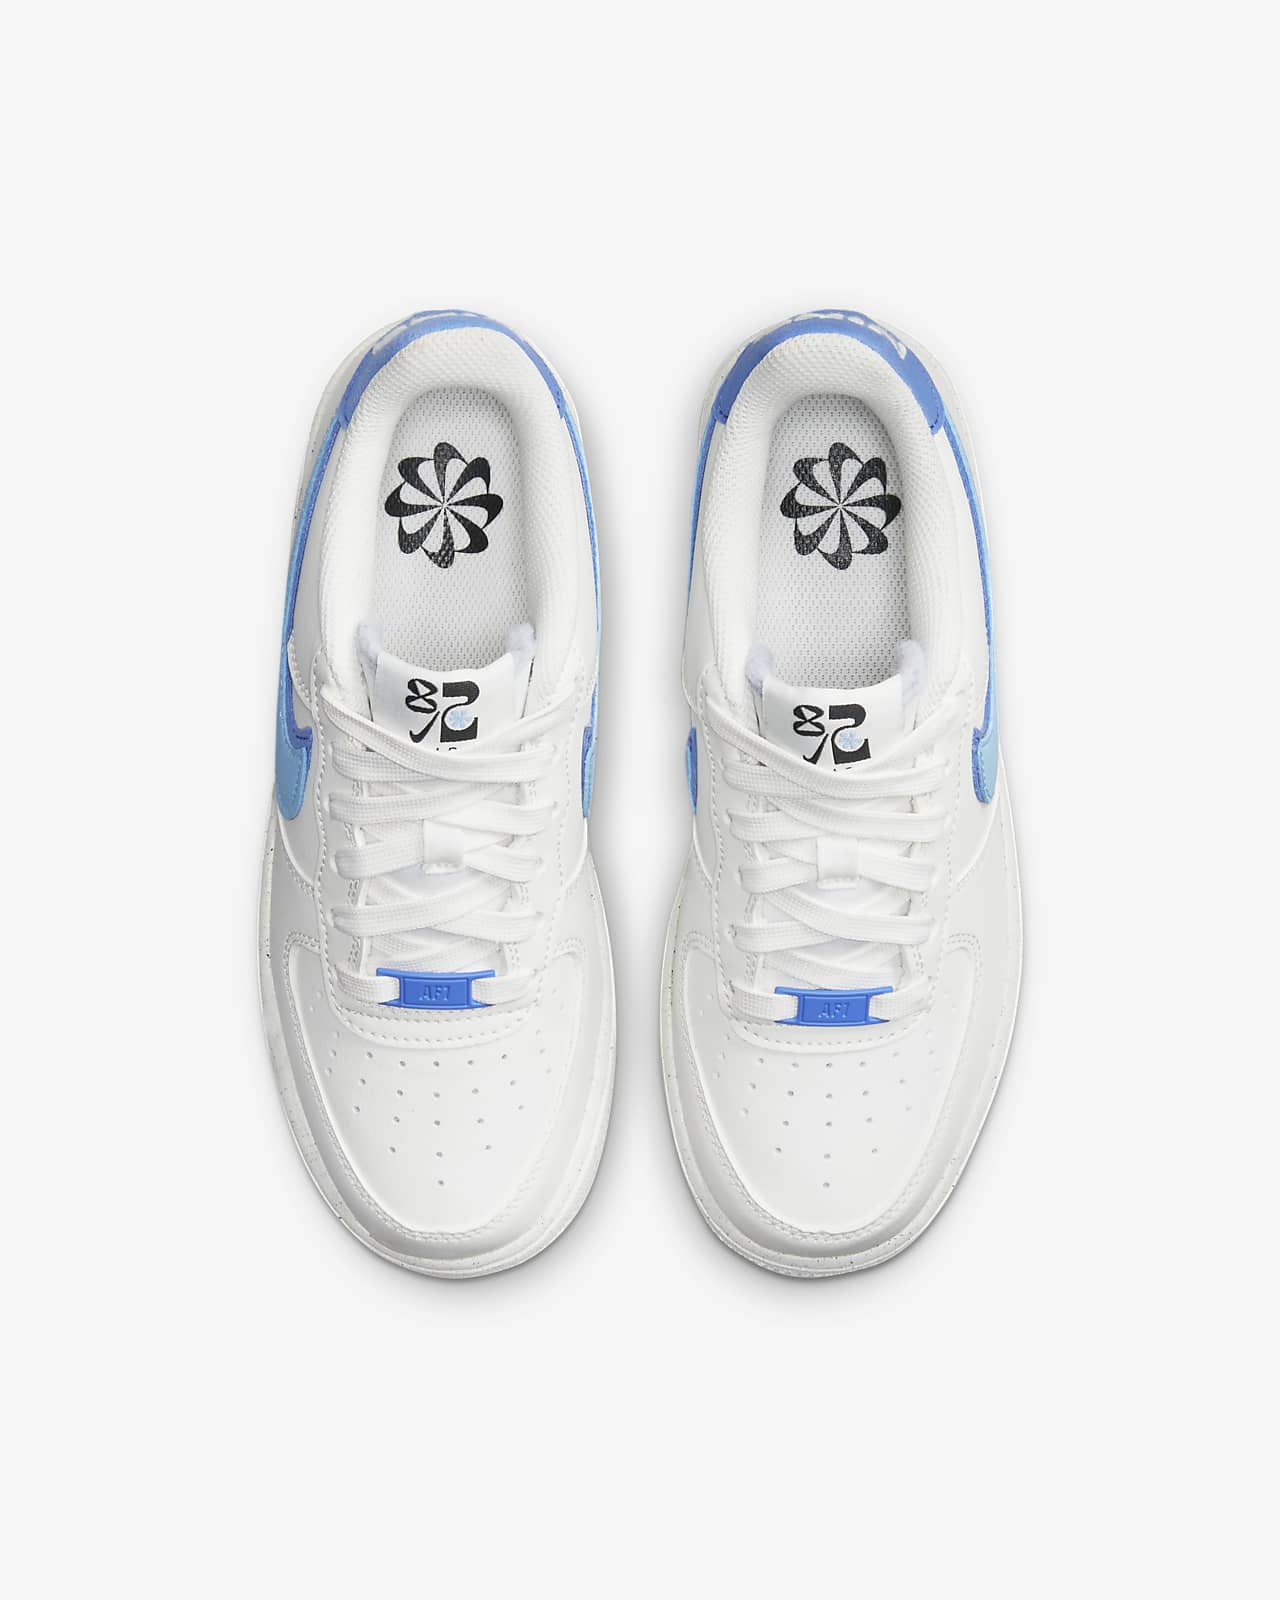 Disappointment Daisy Lunar surface Nike Air Force 1 LV8 Big Kids' Shoes. Nike.com